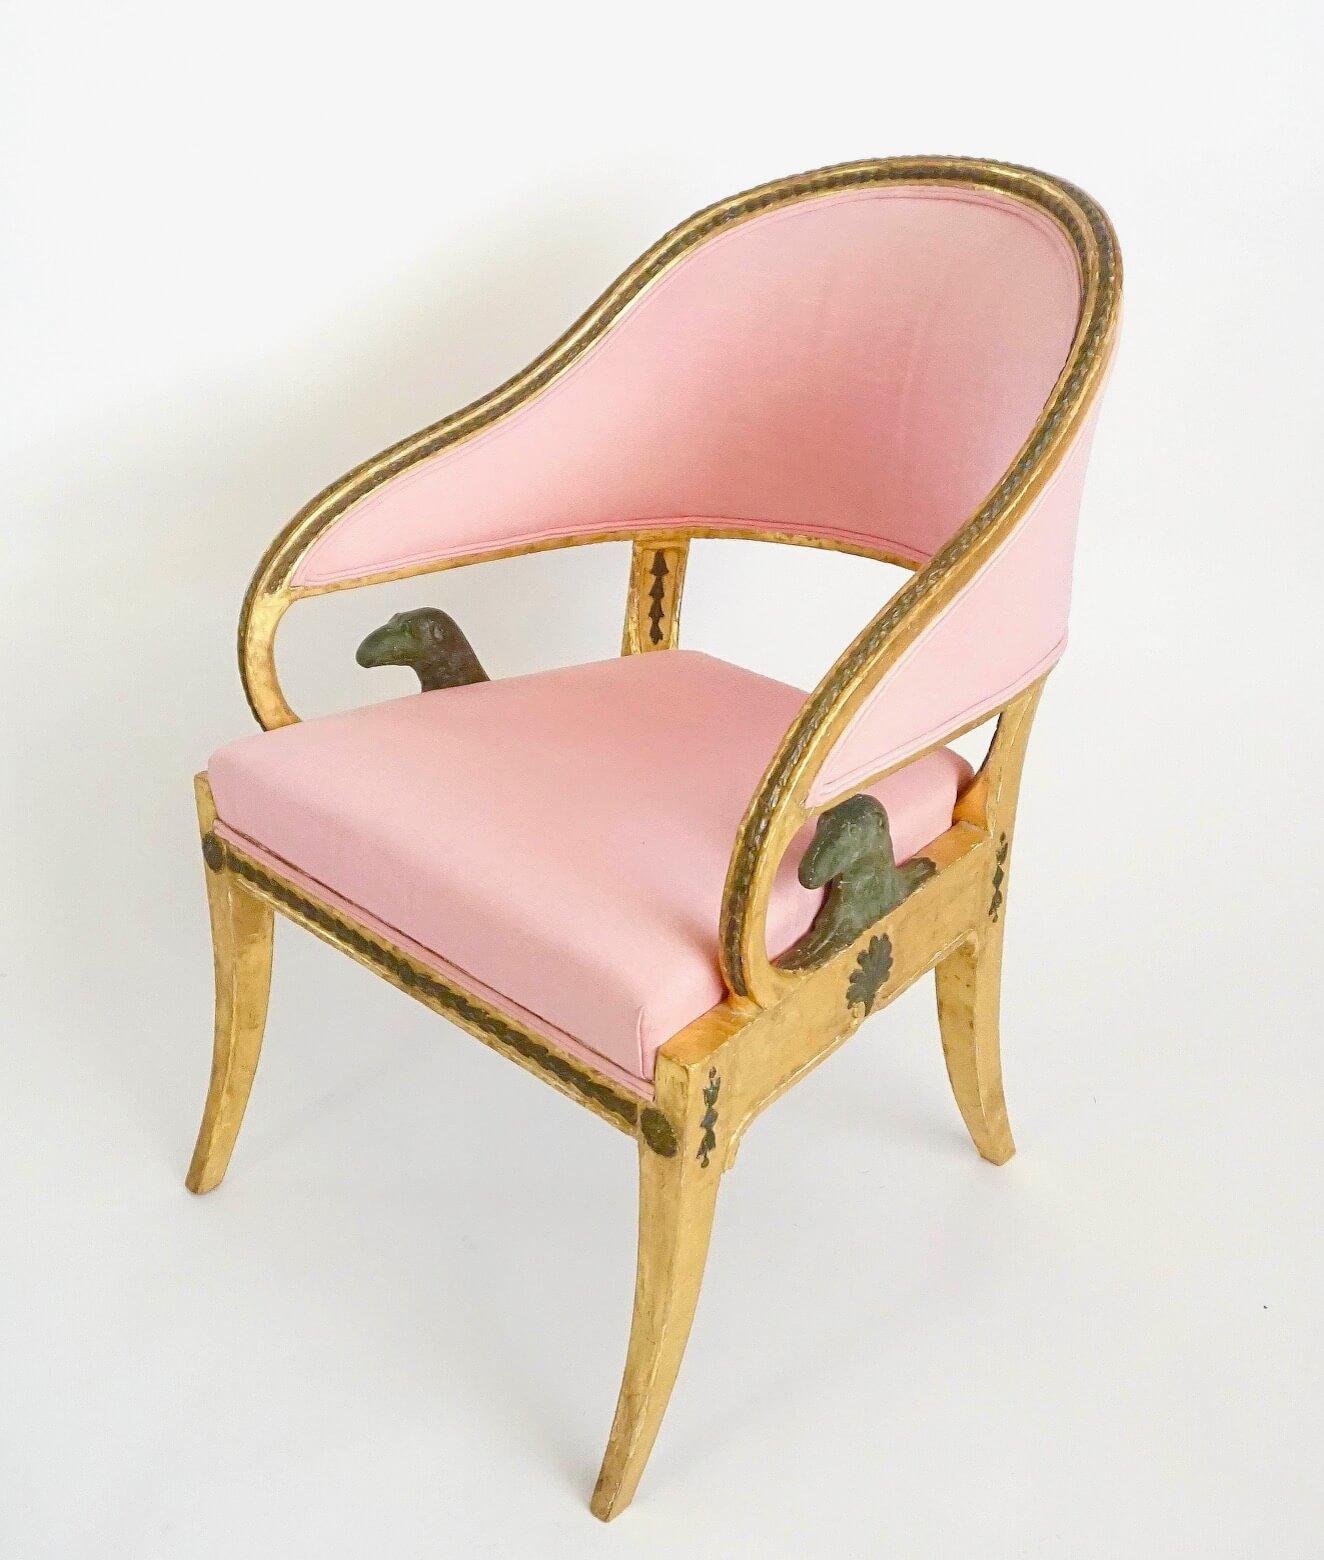 Swedish Gustavian Neoclassical Giltwood Fauteuil by Ephraim Ståhl, circa 1800 For Sale 1